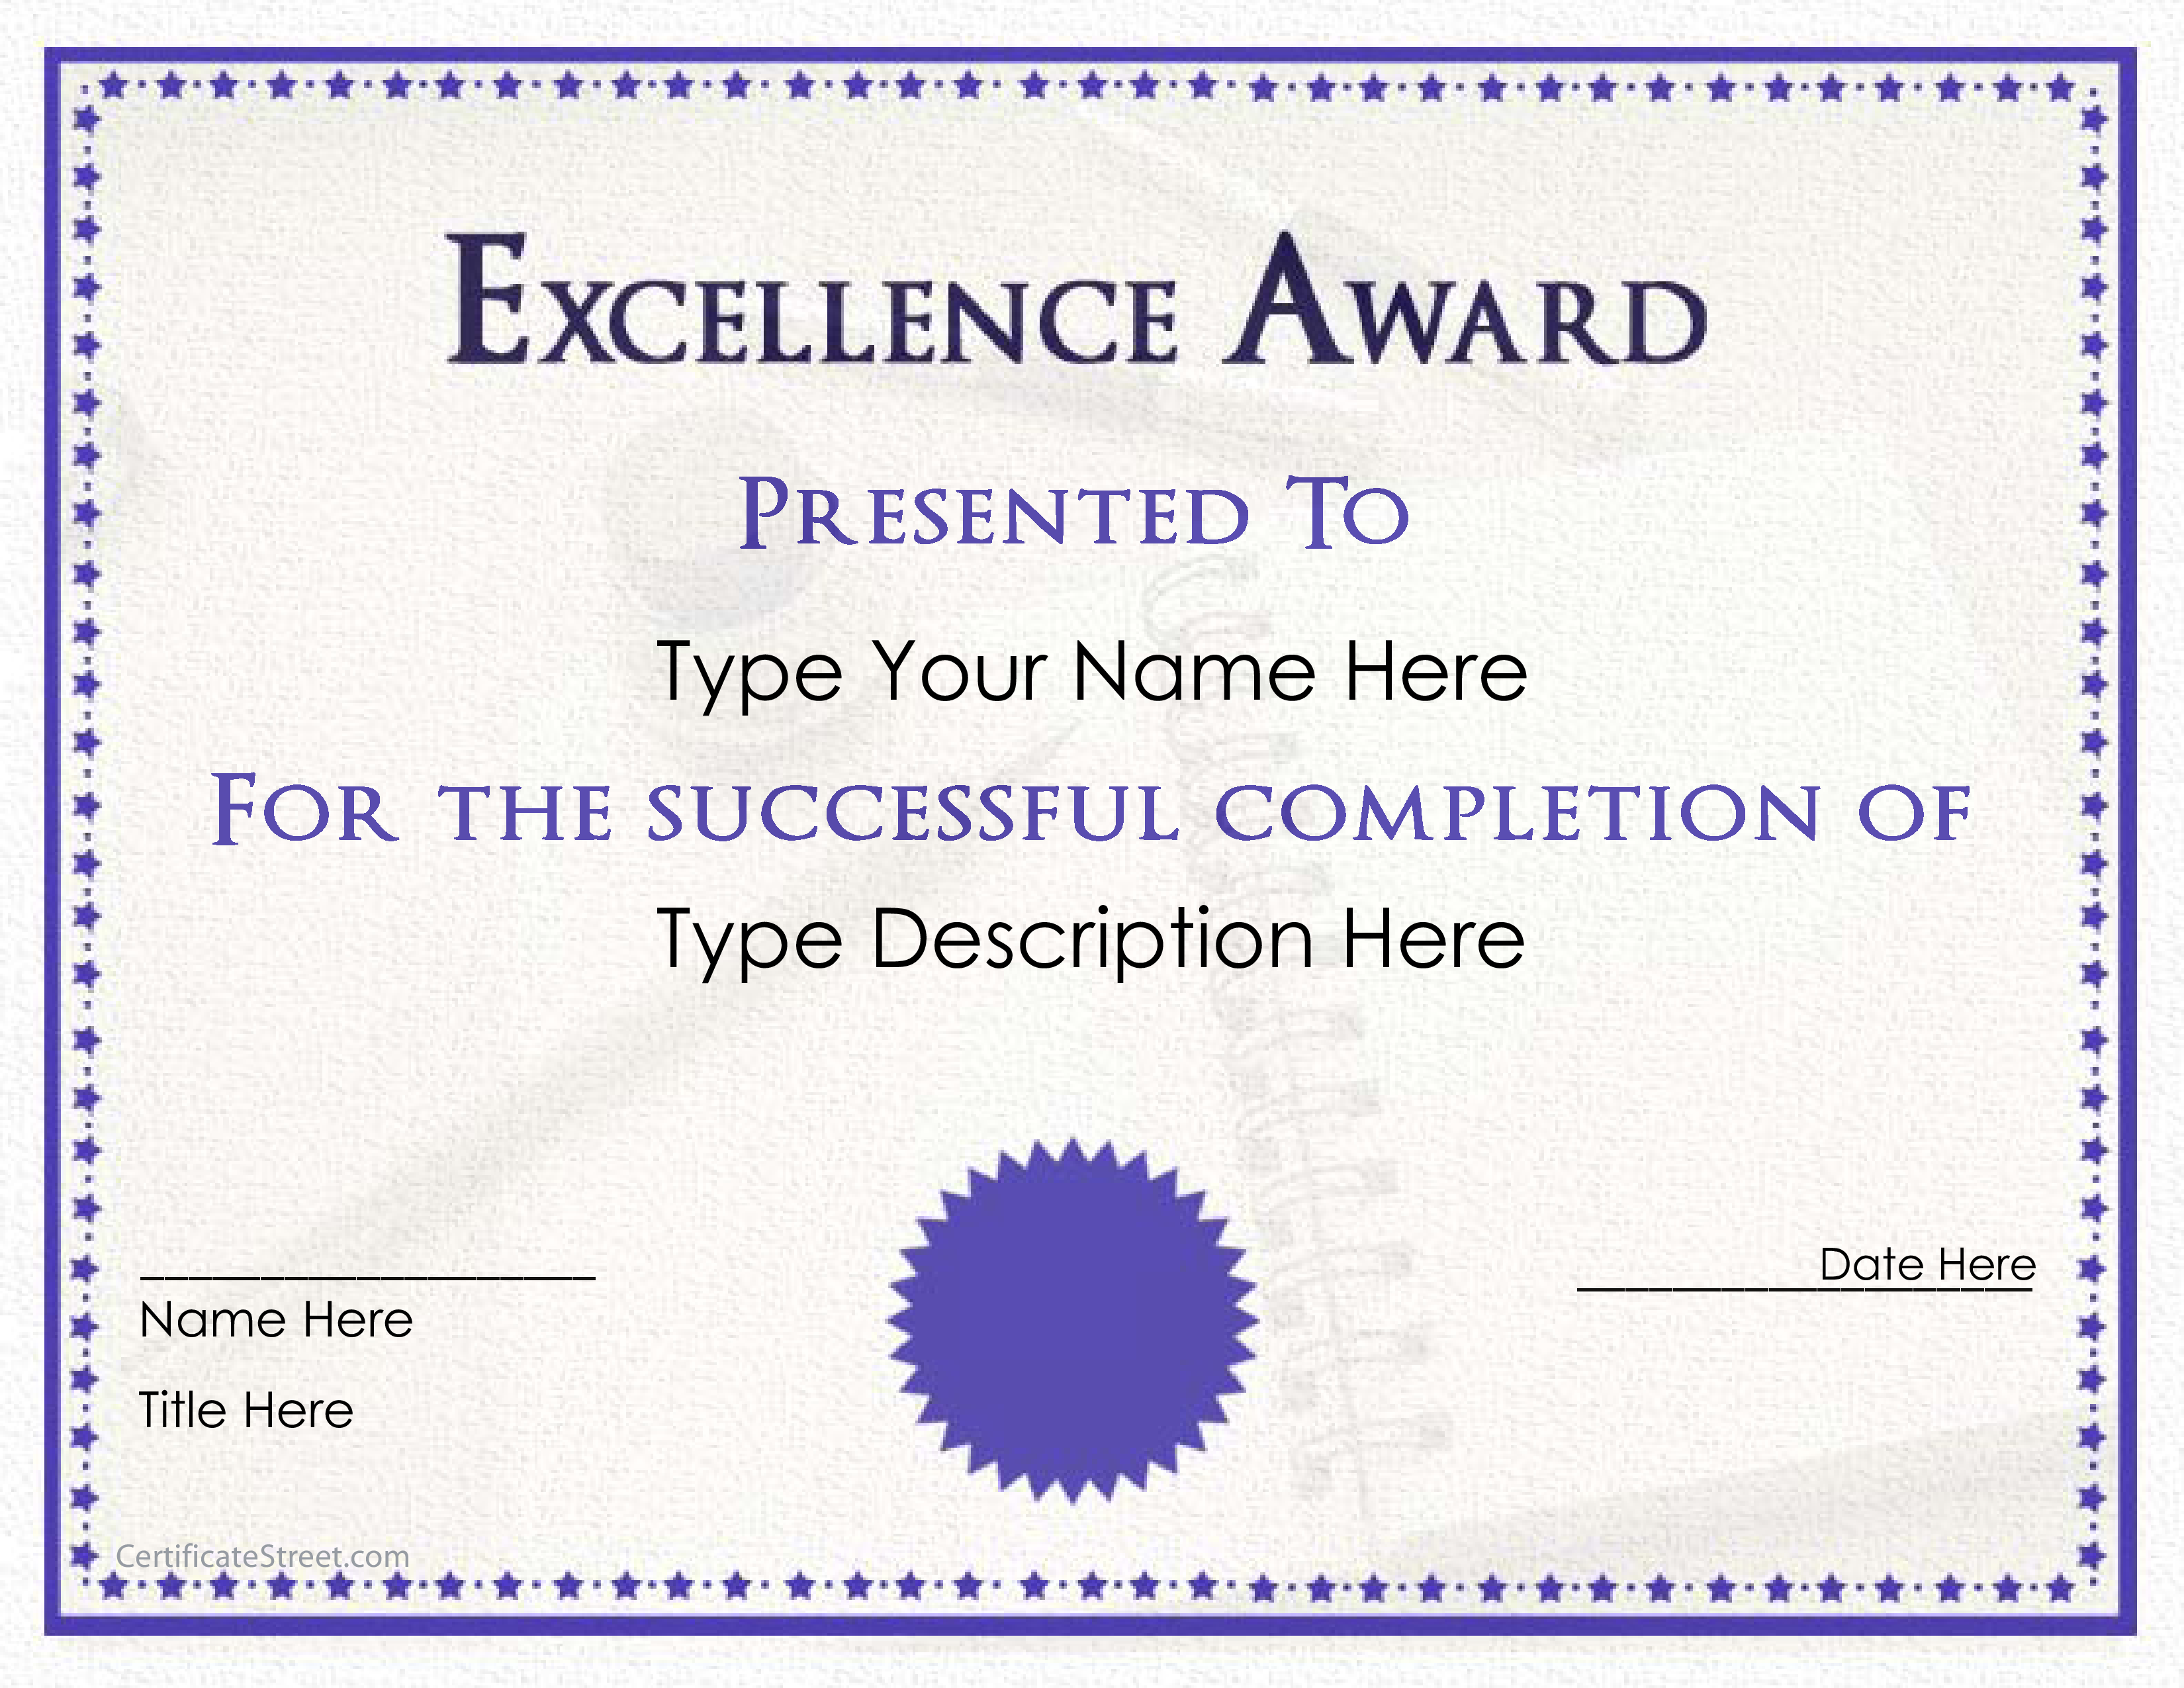 excellence-award-certificate-templates-at-allbusinesstemplates